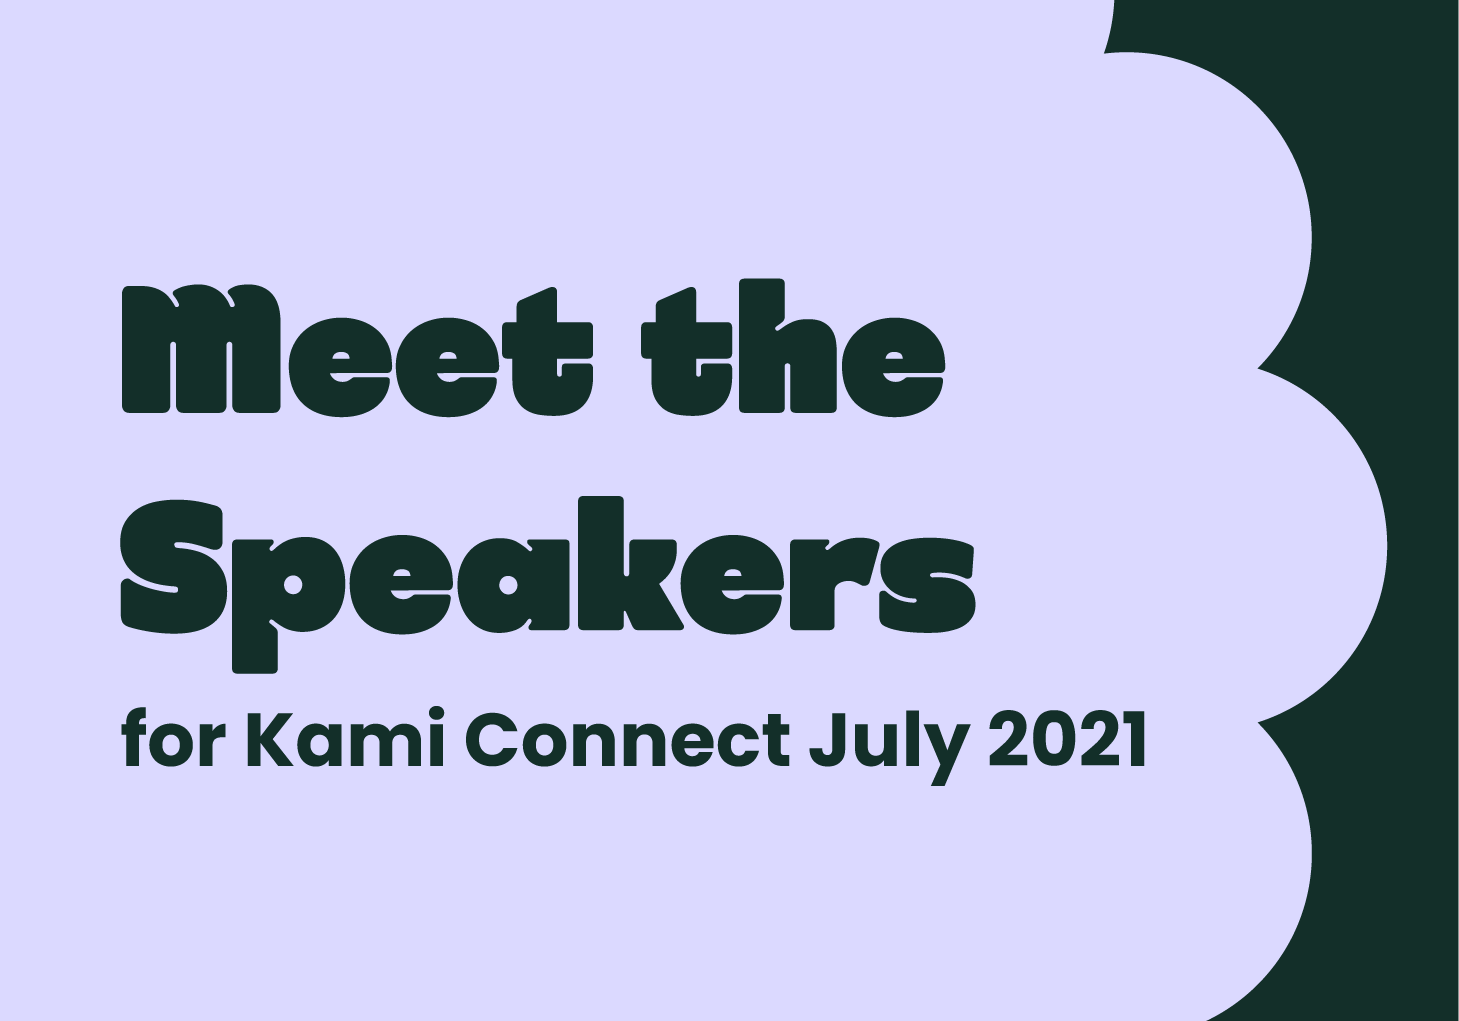 Meet the Speaker for Kami Connect July 2021